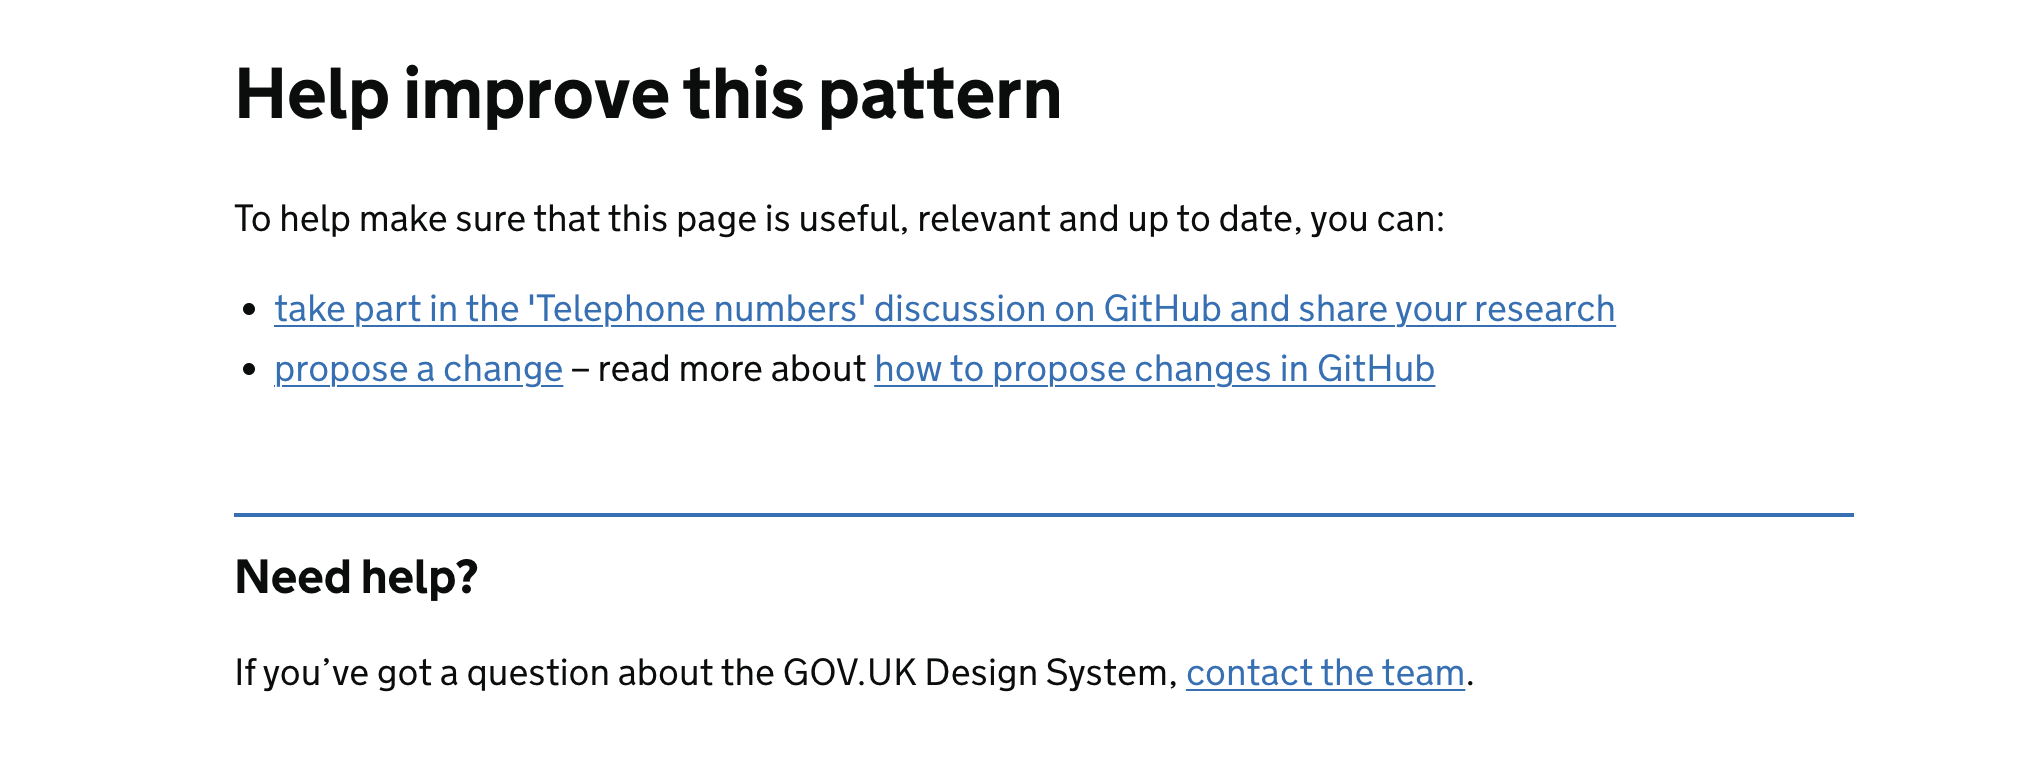 the research section of the Ask users for Telephone numbers design pattern documentation on the GOV.UK Design System. It explains that more research is needed on the best way to handle international numbers, extensions, SMS shortcodes. It invites users to help improve the pattern by taking part in the 'Telephone numbers' discussion on GitHub and sharing their research, or by proposing a change in GitHub.